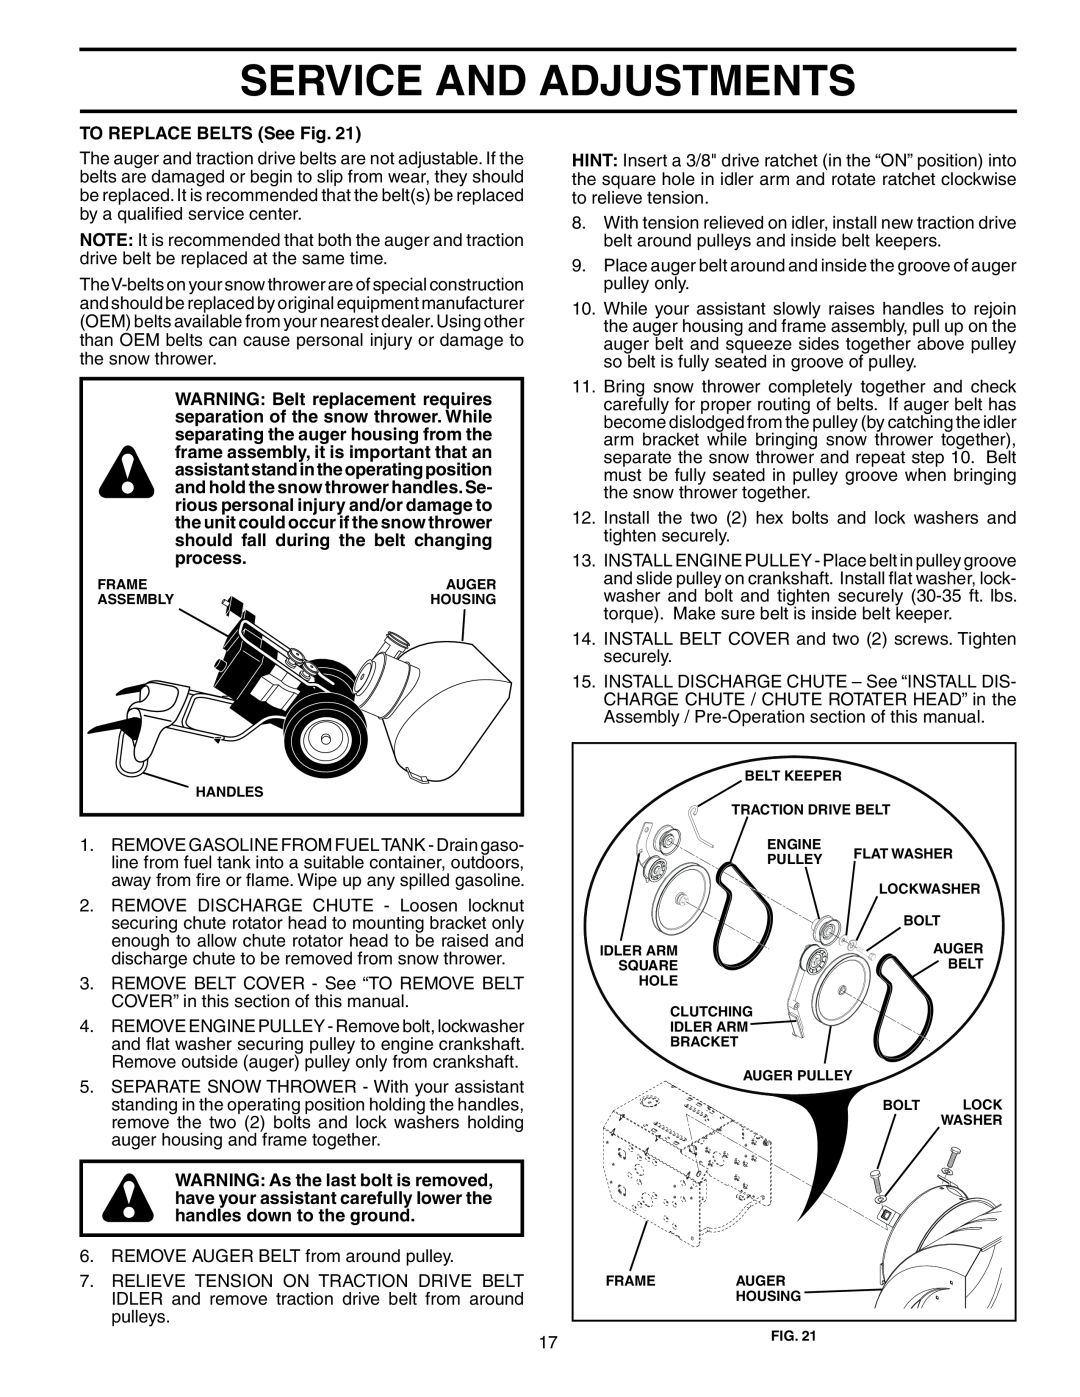 Husqvarna 8524STE owner manual Service And Adjustments, TO REPLACE BELTS See Fig 